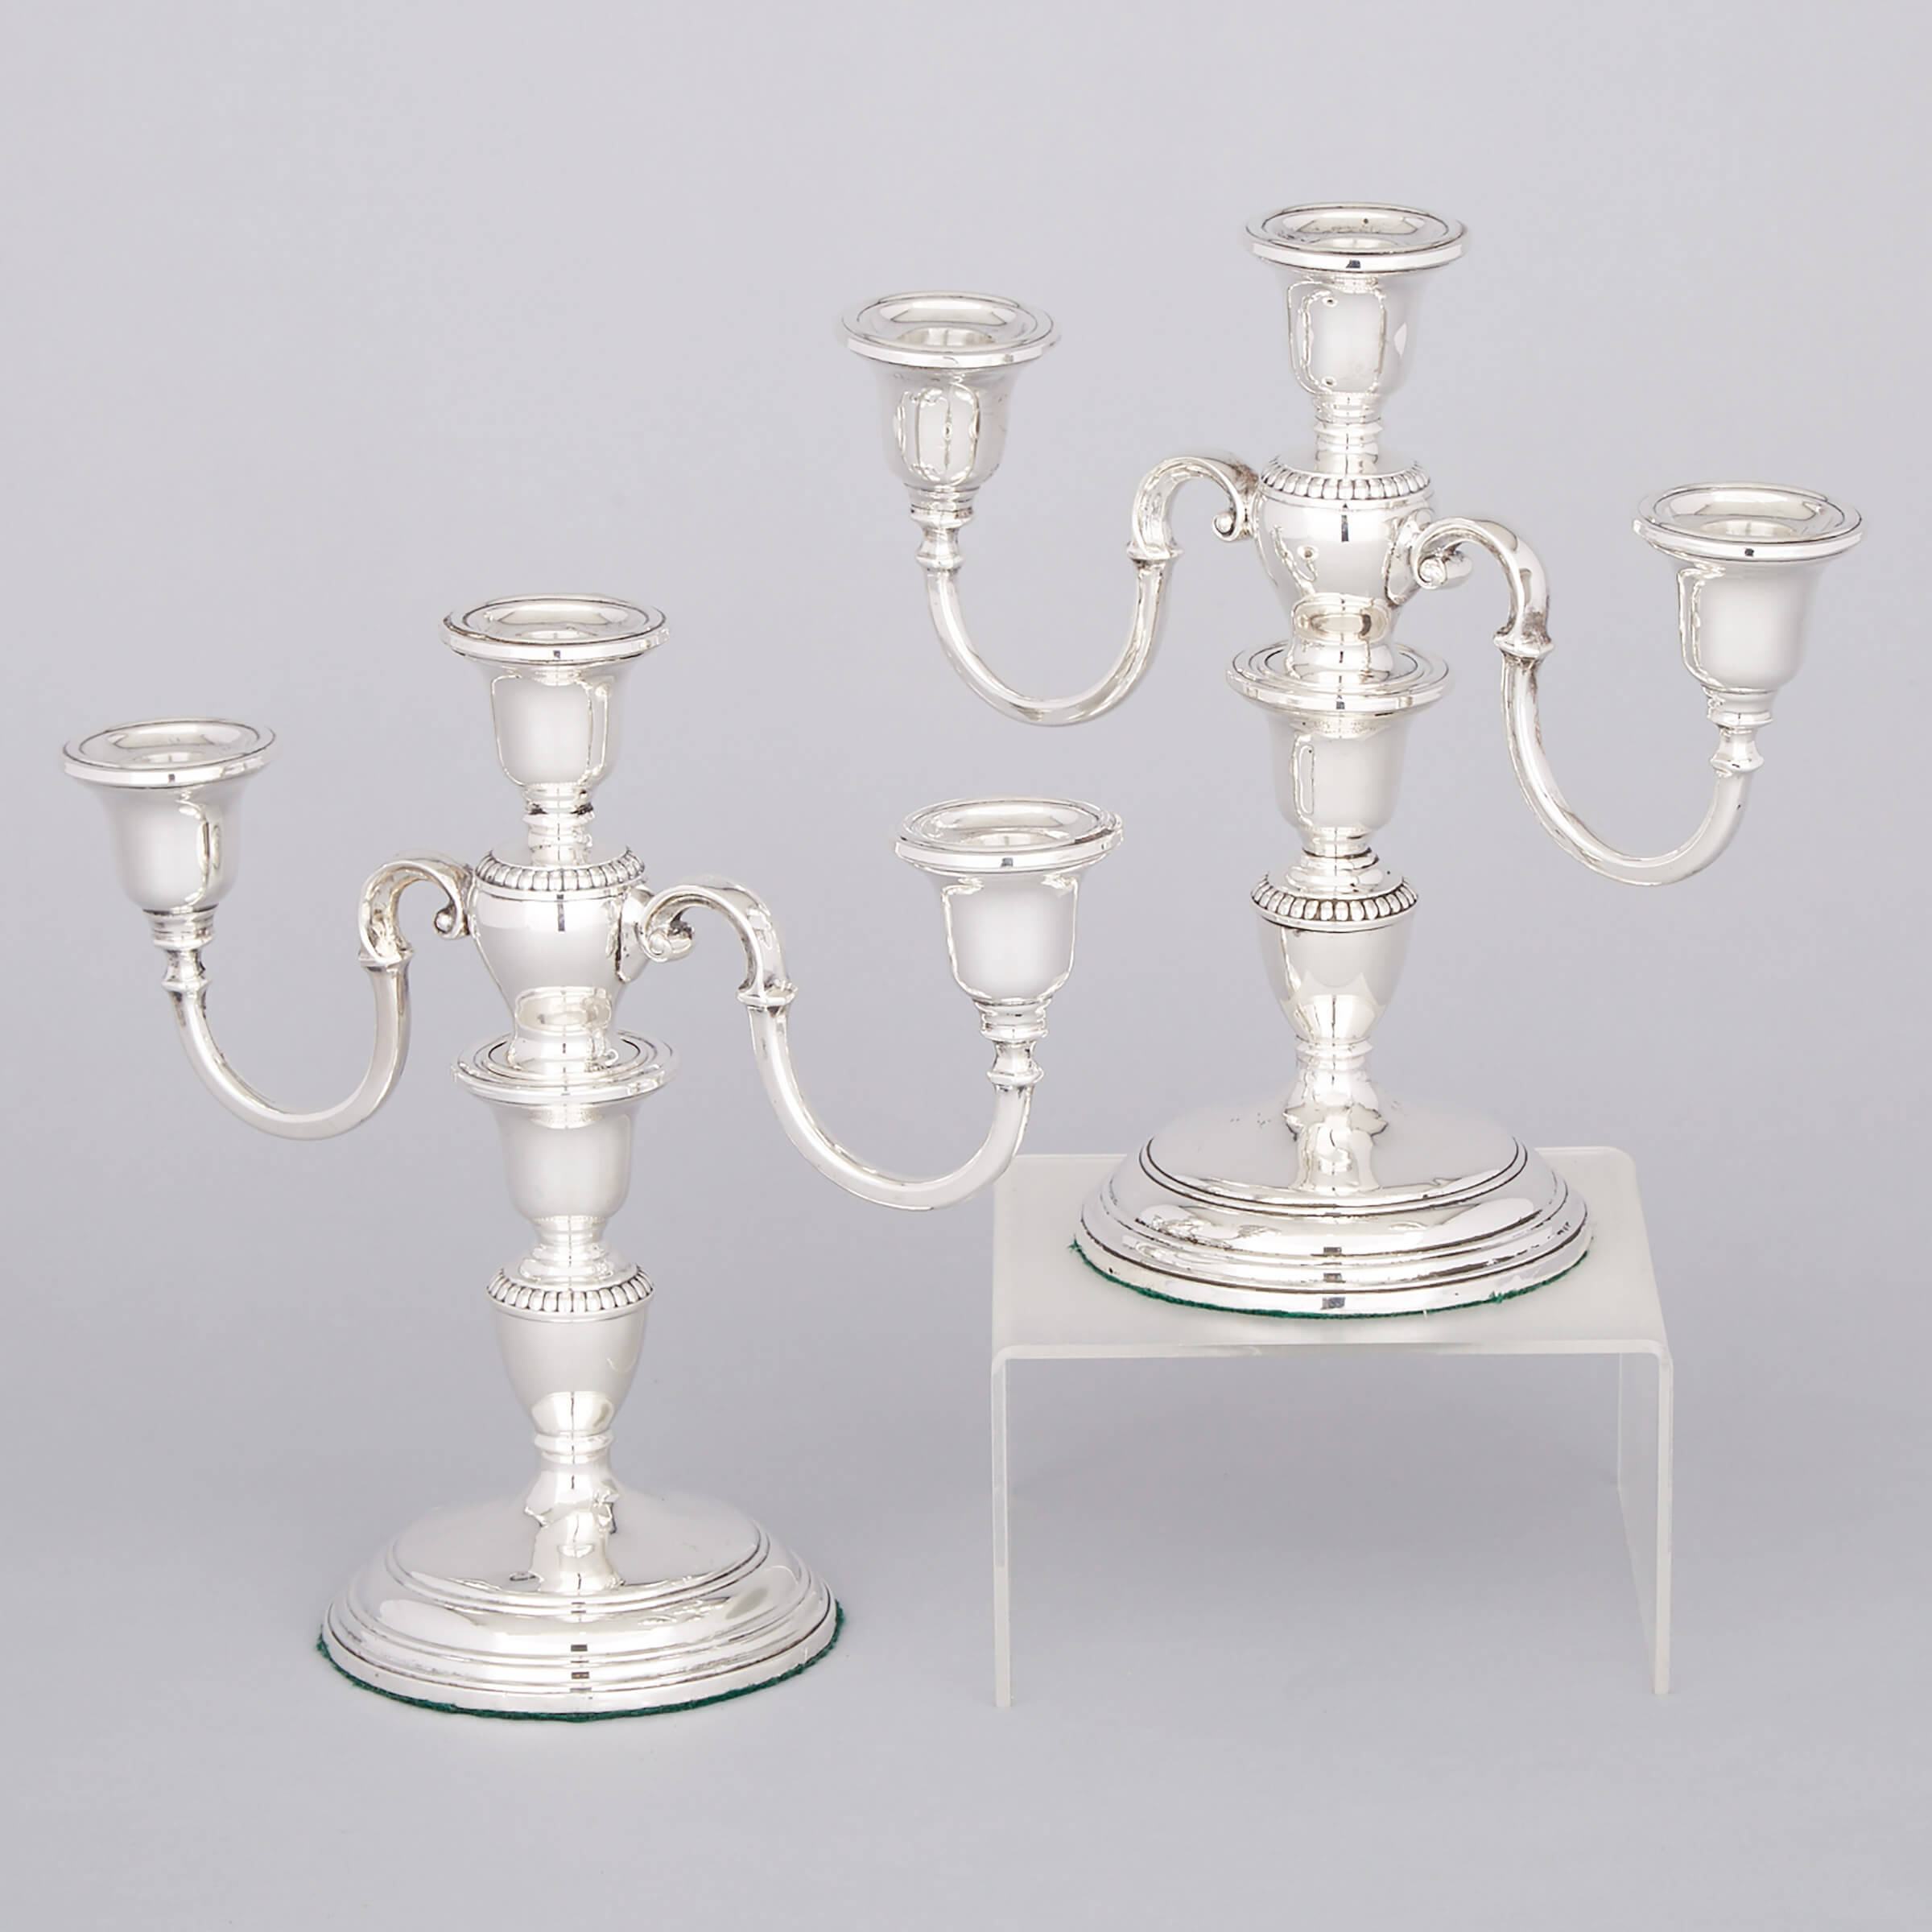 Pair of Canadian Silver Three-Light Candelabra, Henry Birks & Sons, Montreal, Que., 1947